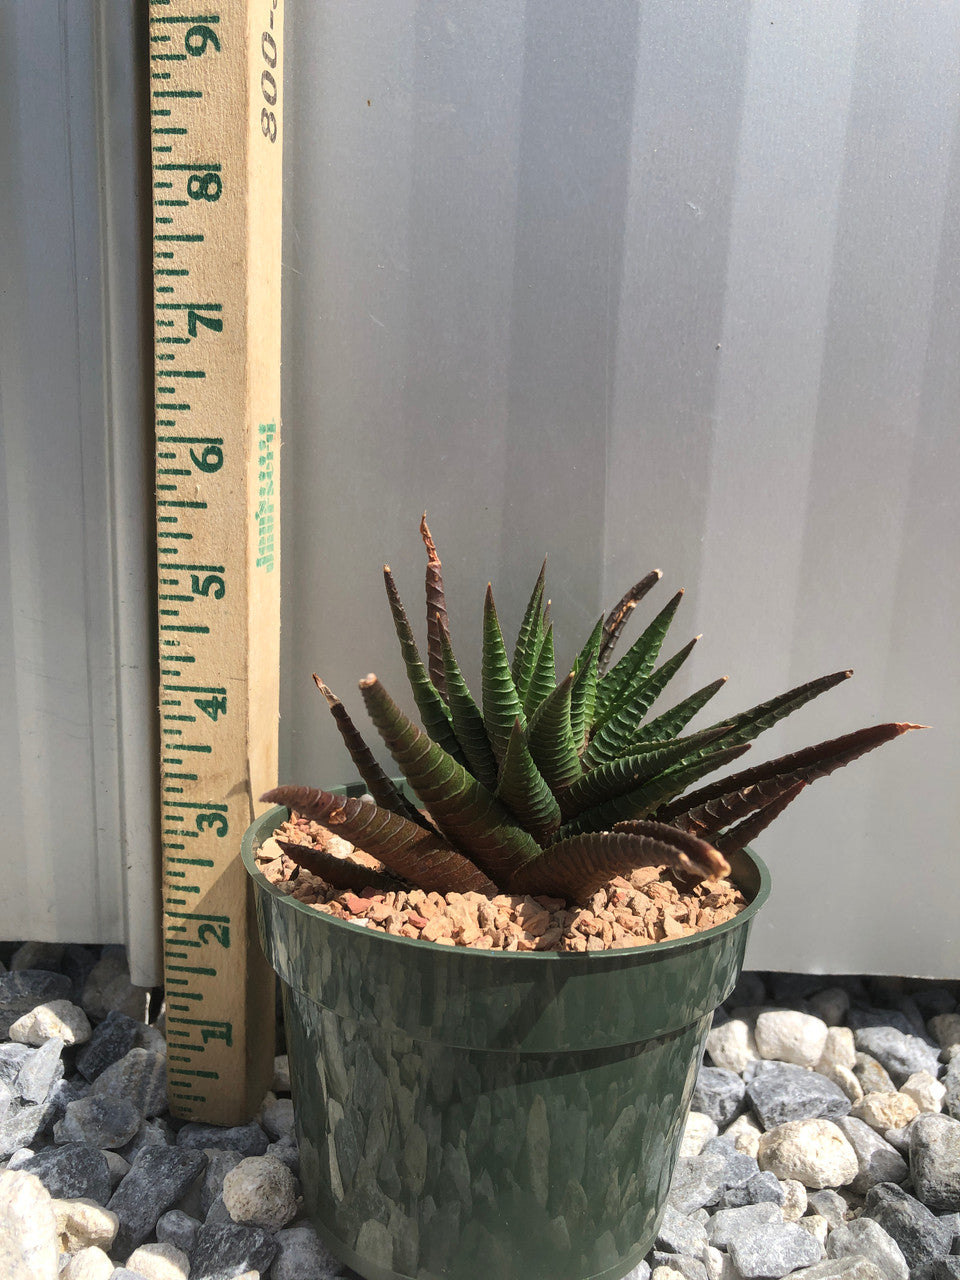 Small 4 inch pot of Haworthia Limifolia with measuring stick